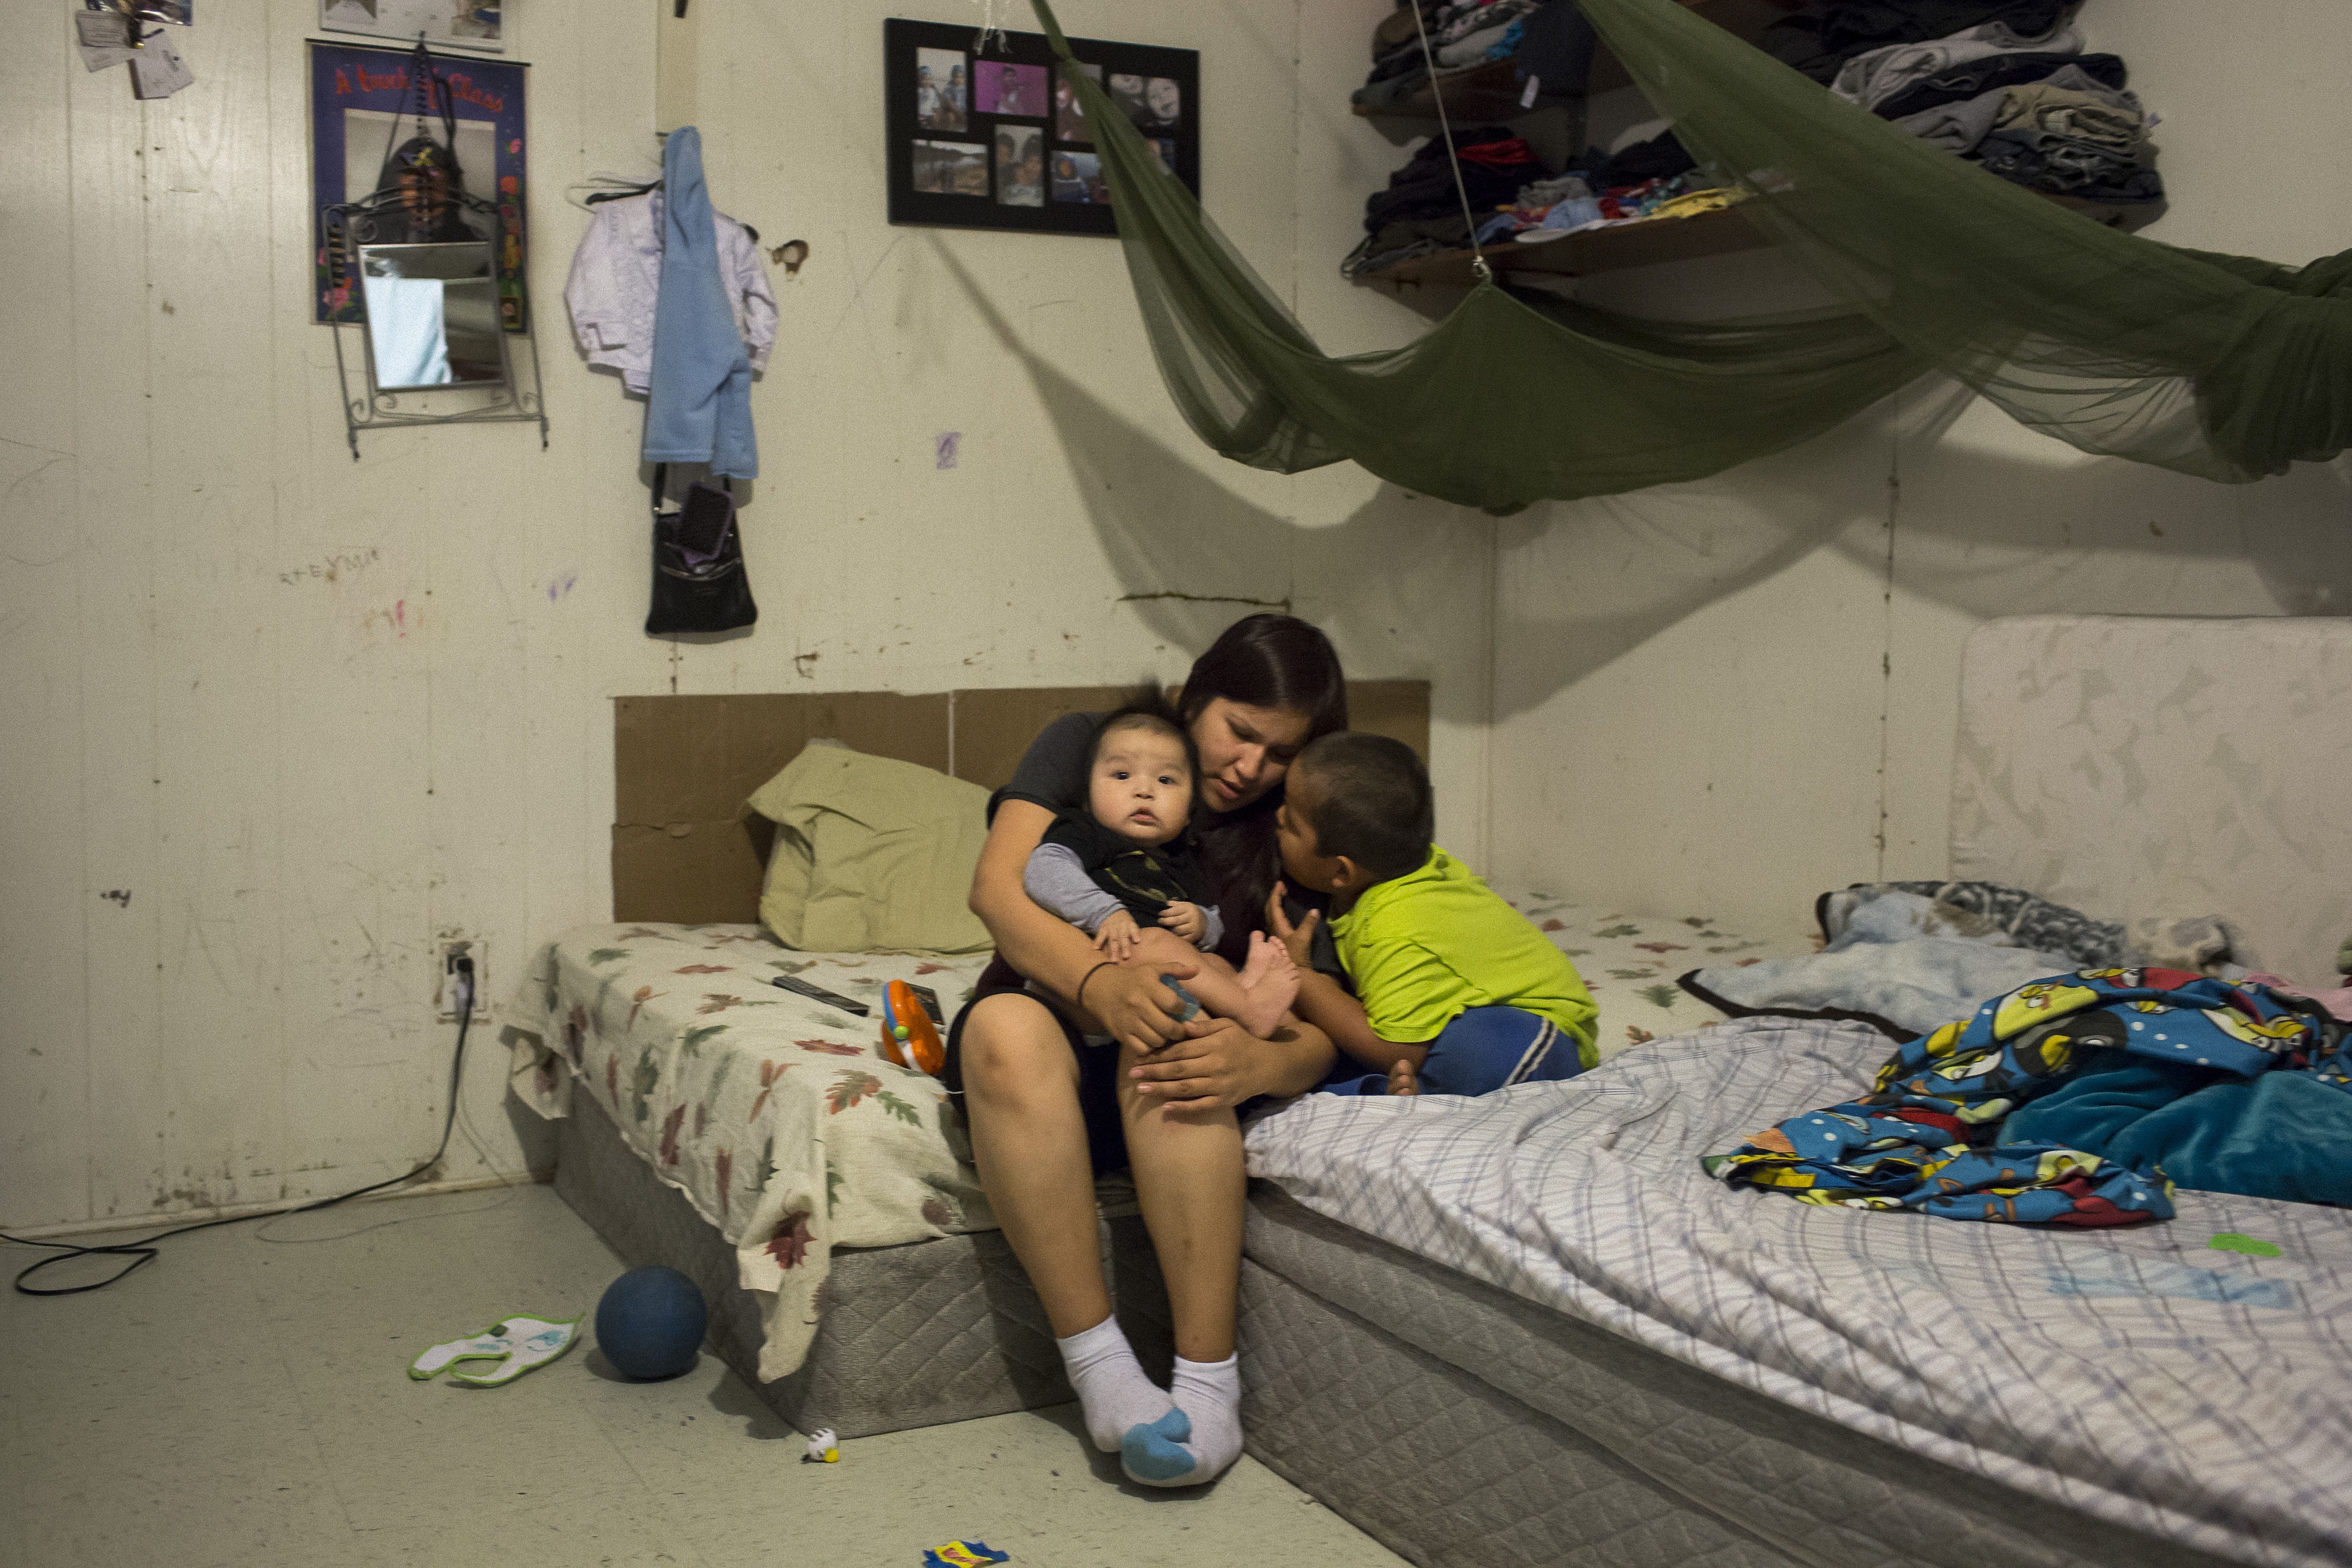 Twenty-five-year-old Martina Koosees with her six-month-old son Korey Koosees and son Dyson Koosees, 4, in the single room dwelling where they live. The pressures of a chronic housing shortage leave families forced to live in very cramped conditions, amplifying many of the stresses the encounter in their lives. As one member of the community put it, “We have so many shortages for housing and social programs in our communities. Families are stressed out. It is a manifestation of an ongoing colonialism.” Image by David Maurice Smith. Canada, 2016.